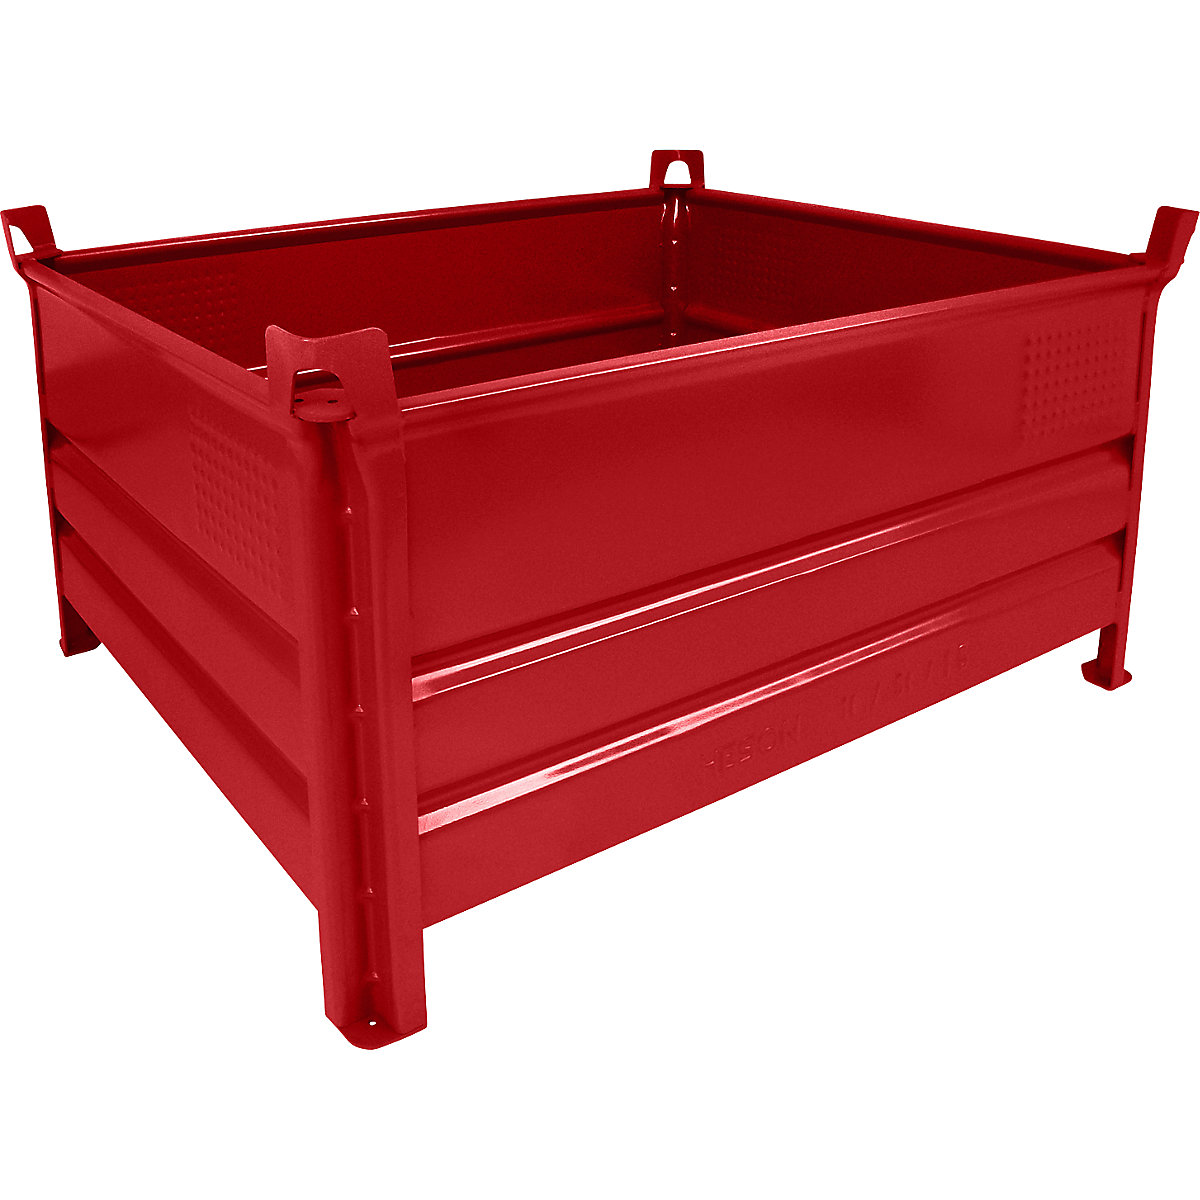 Solid panel box pallet – Heson, WxL 1000 x 1200 mm, max. load 1000 kg, red, 10+ items-6